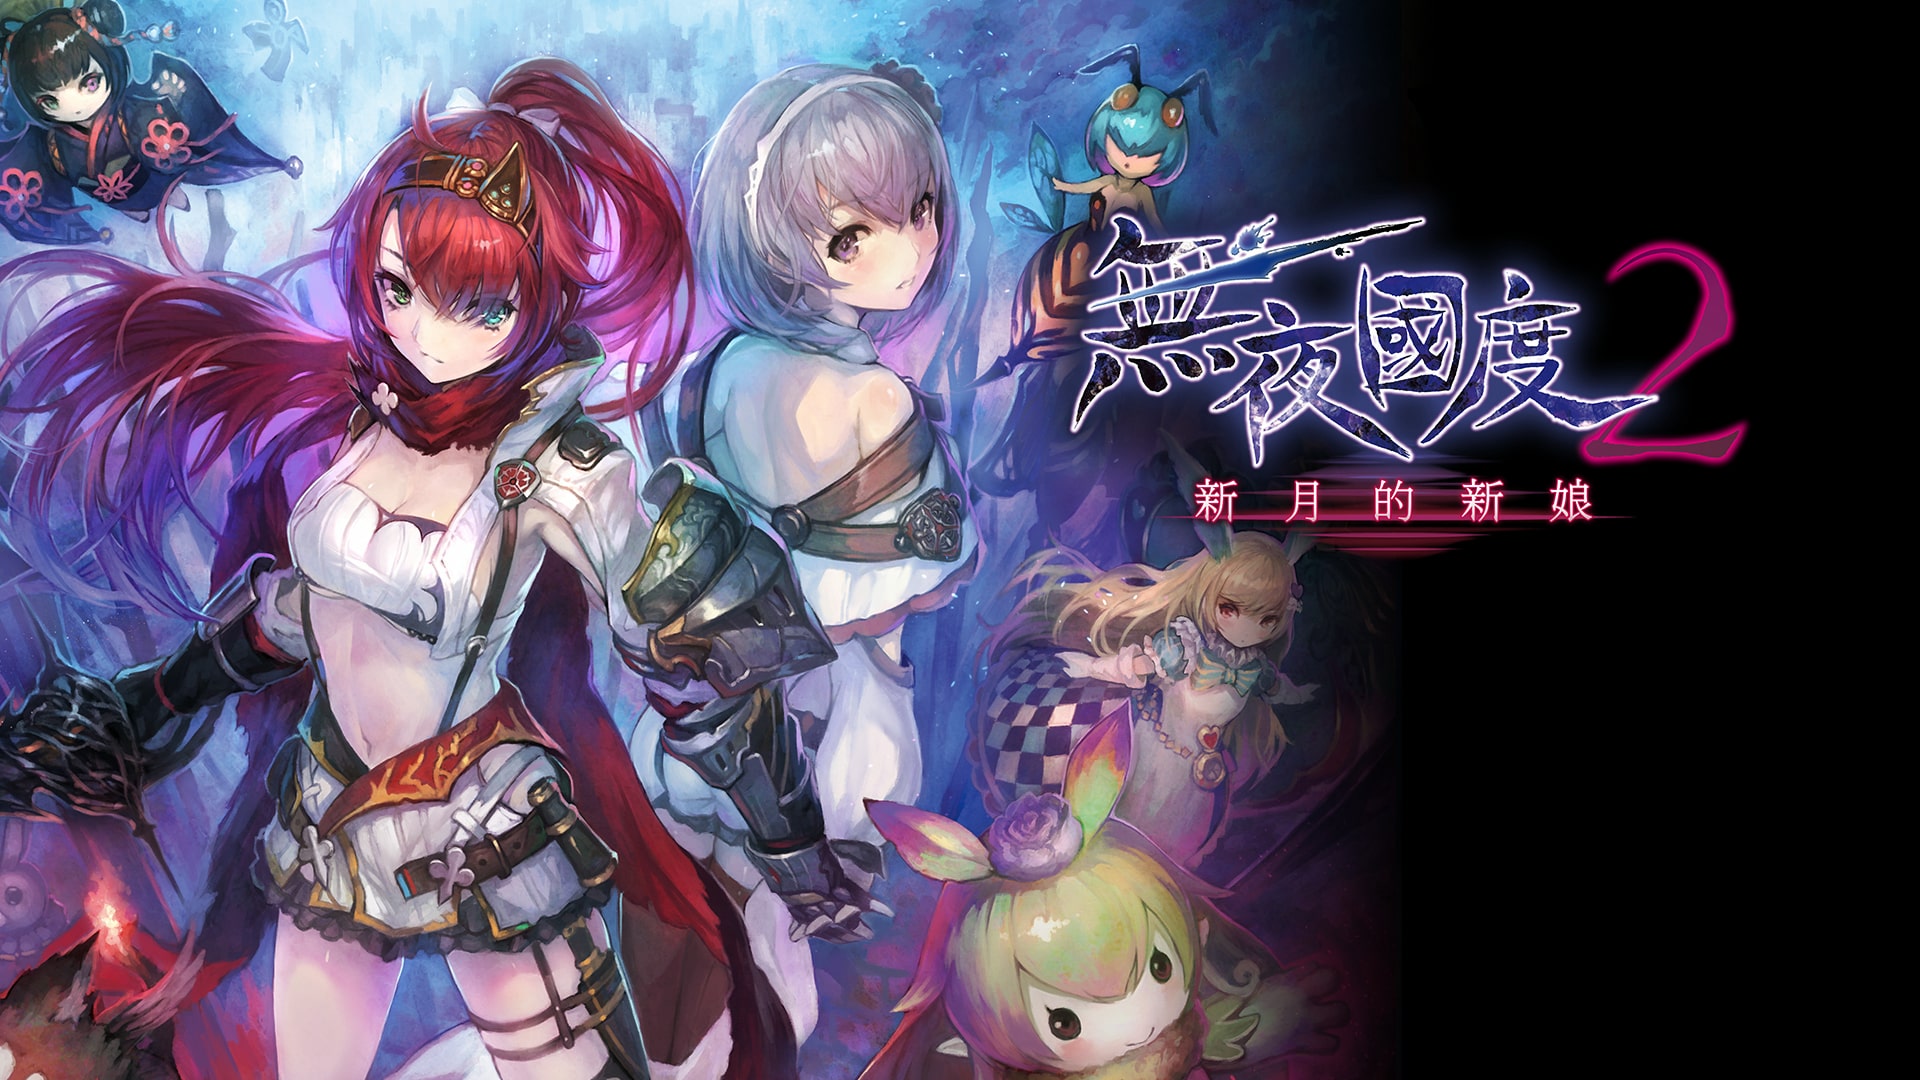 nights of azure 2 bride of the new moon ps4